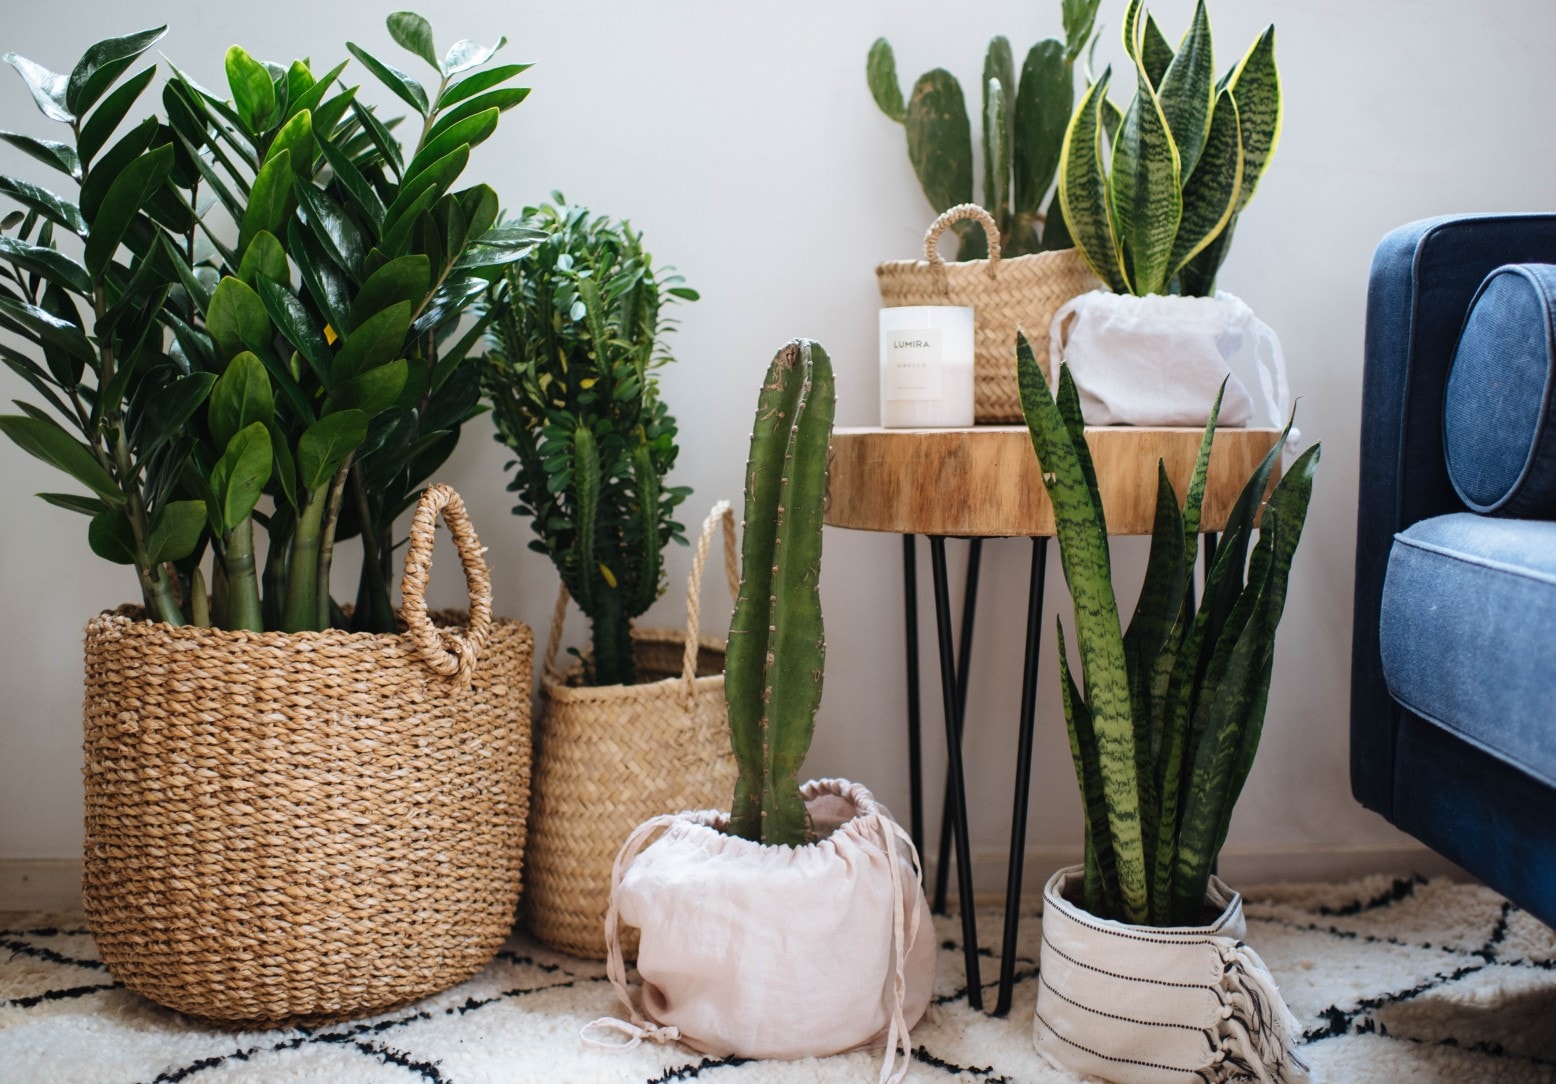 hdb cleaning tips - clean indoor plants